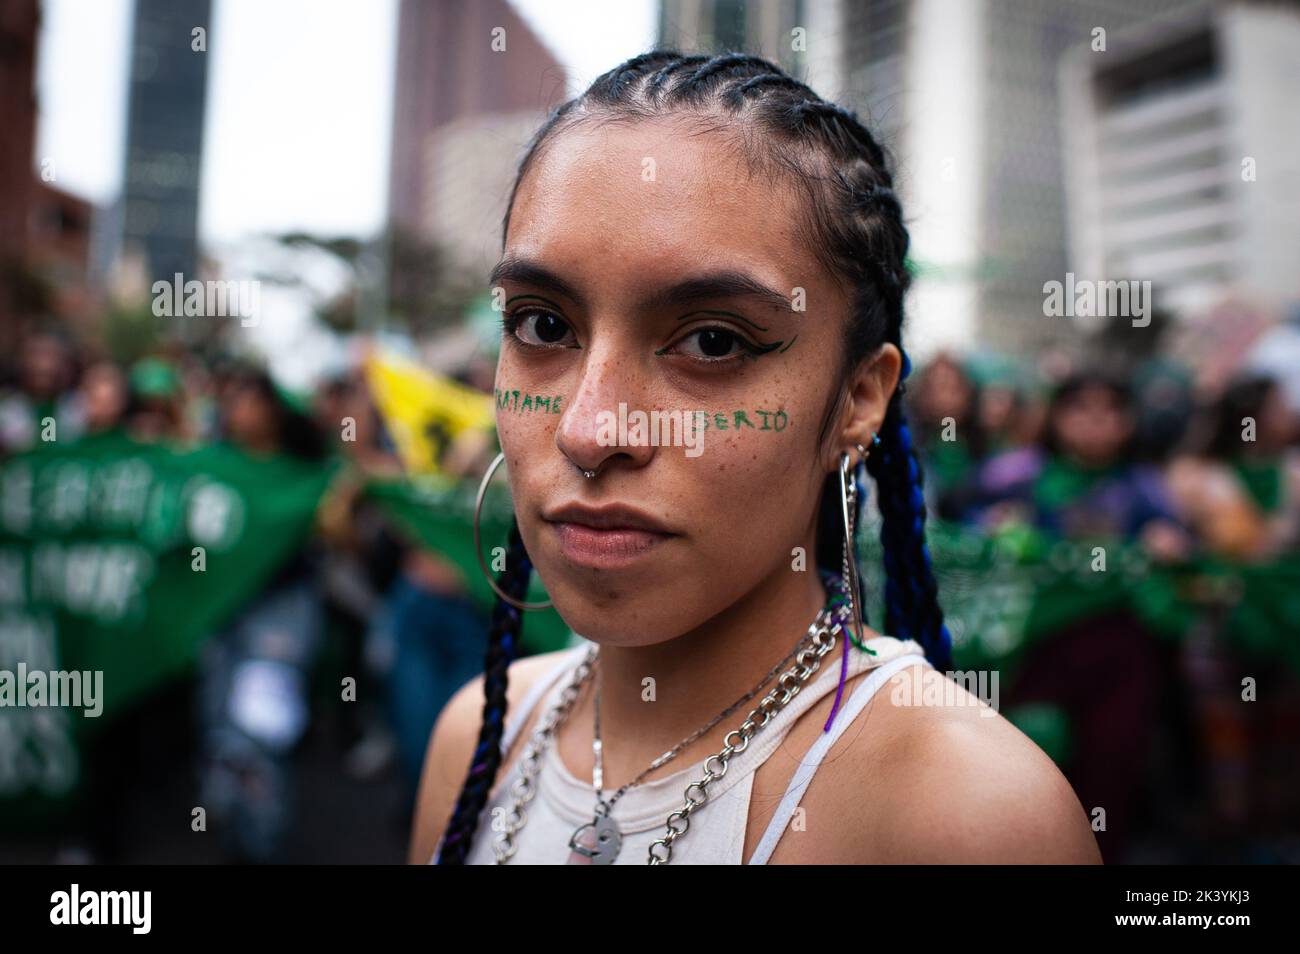 Bogota, Colombia. 28th Sep, 2022. A demonstrator poses for a portrait during the International Day for the Remembrance of the Slave Trade and its Abolition demonstrations in Bogota, Colombia, September 28, 2022. Colombia became one of the first countries in Latin America to decriminalize abortions up to week 24. Photo by: Chepa Beltran/Long Visual Press Credit: Long Visual Press/Alamy Live News Stock Photo